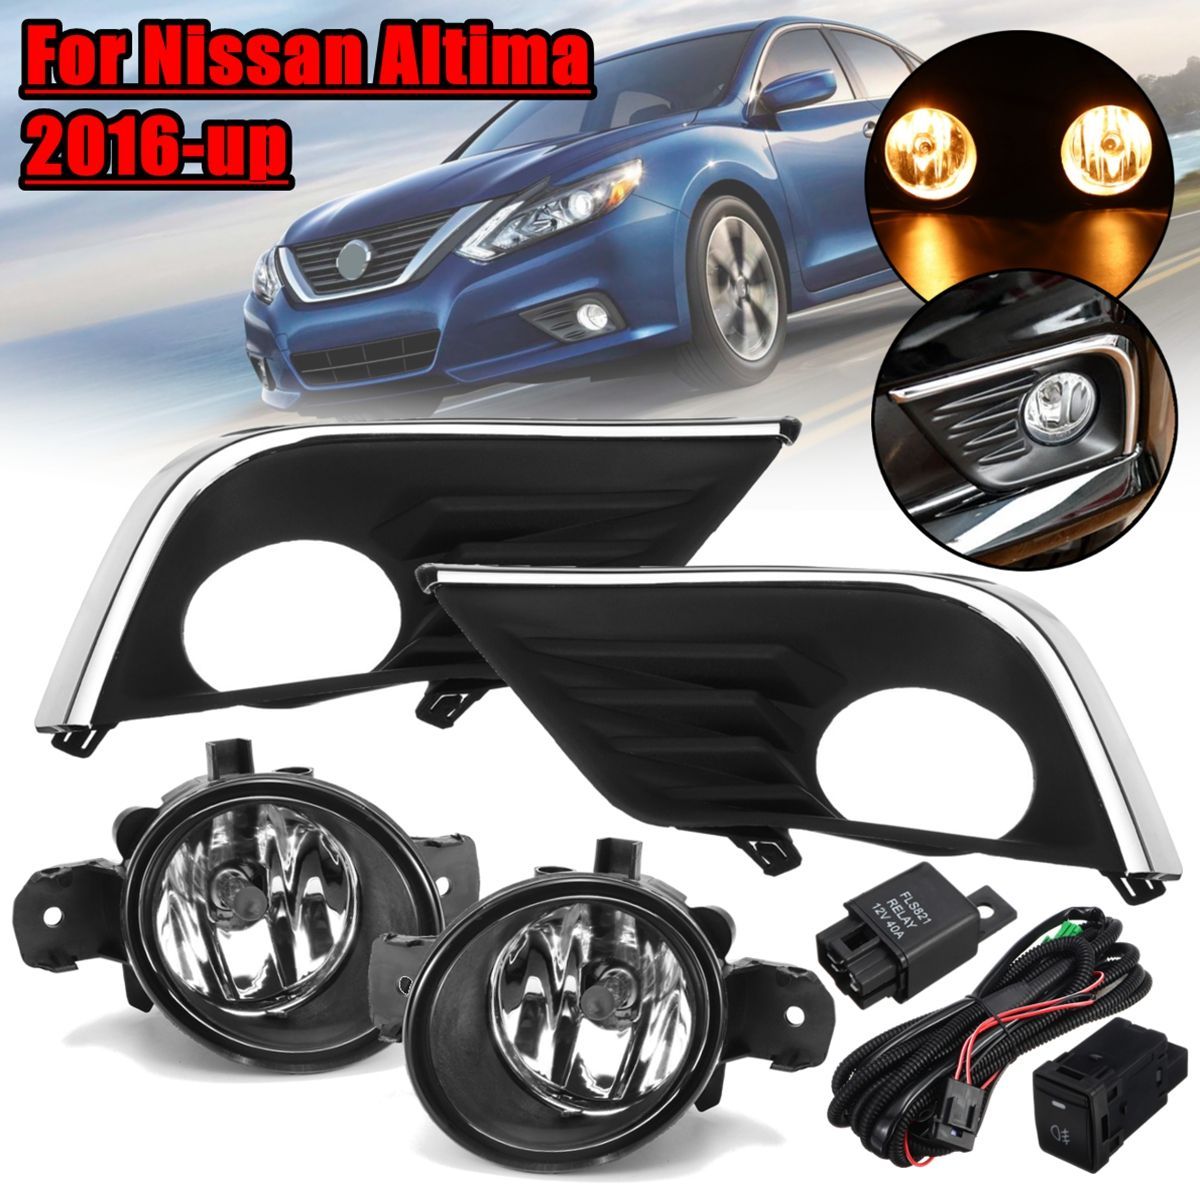 2Pcs-Car-Front-Bumper-Fog-Lights-Lamps-H11-Bulbs-With-Grilles-Harness-Wiring-For-Nissan-Altima-2016-1681260